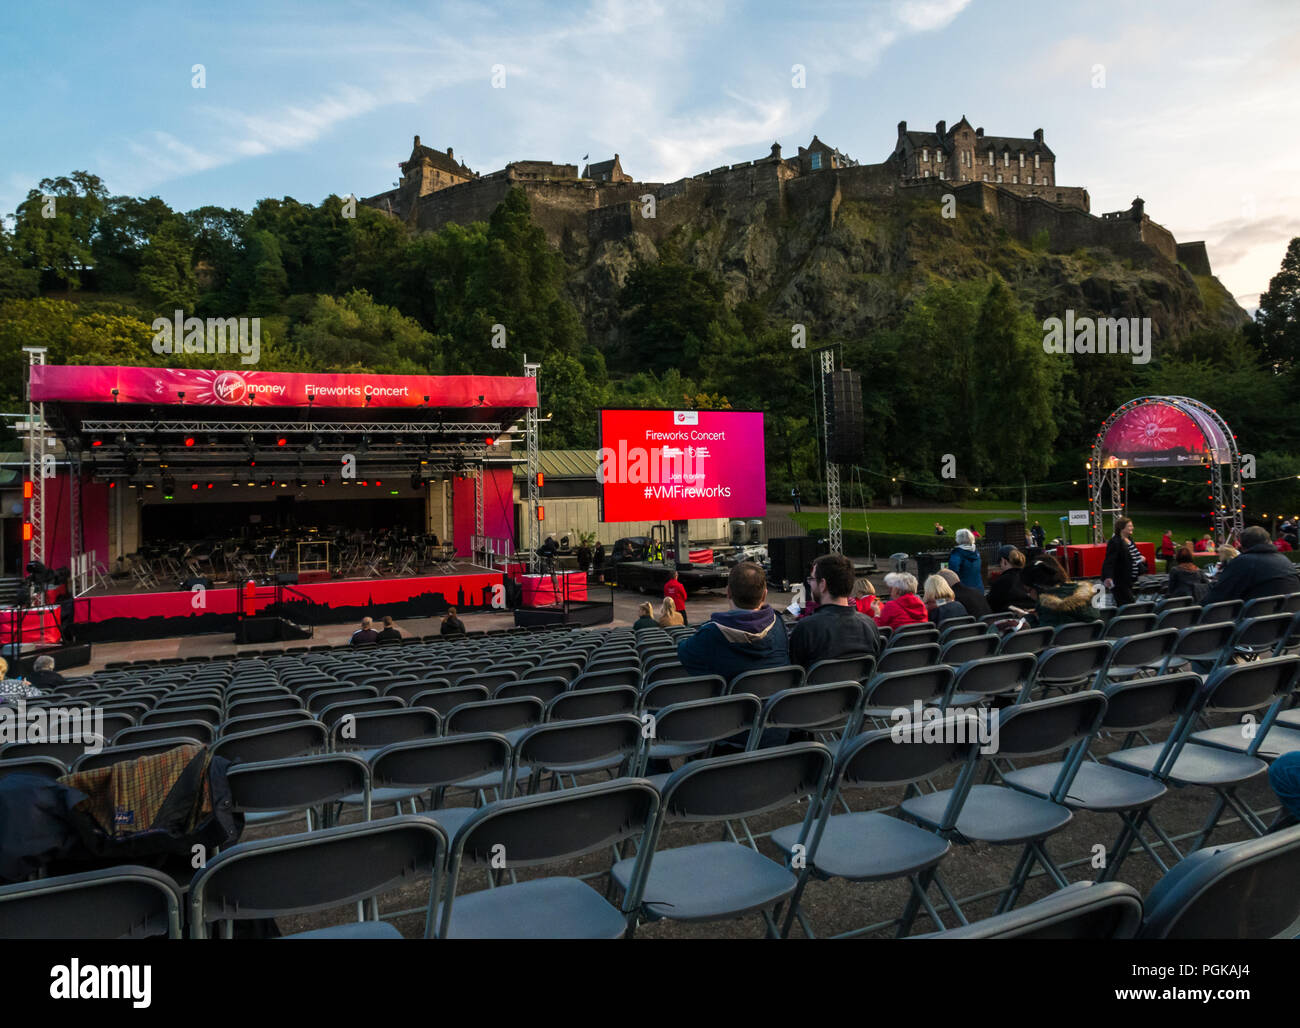 Princes Street Gardens, Edinburgh, Scotland, UK, 27th August 2018. Edinburgh International Festival finale Virgin Money sponsored fireworks. The Scottish Chamber Orchestra play selections from Holst's Suite The Planets choreographed with fireworks from Edinburgh Castle to end the Summer festival. The audience begins to arrive at the Ross bandstand Stock Photo